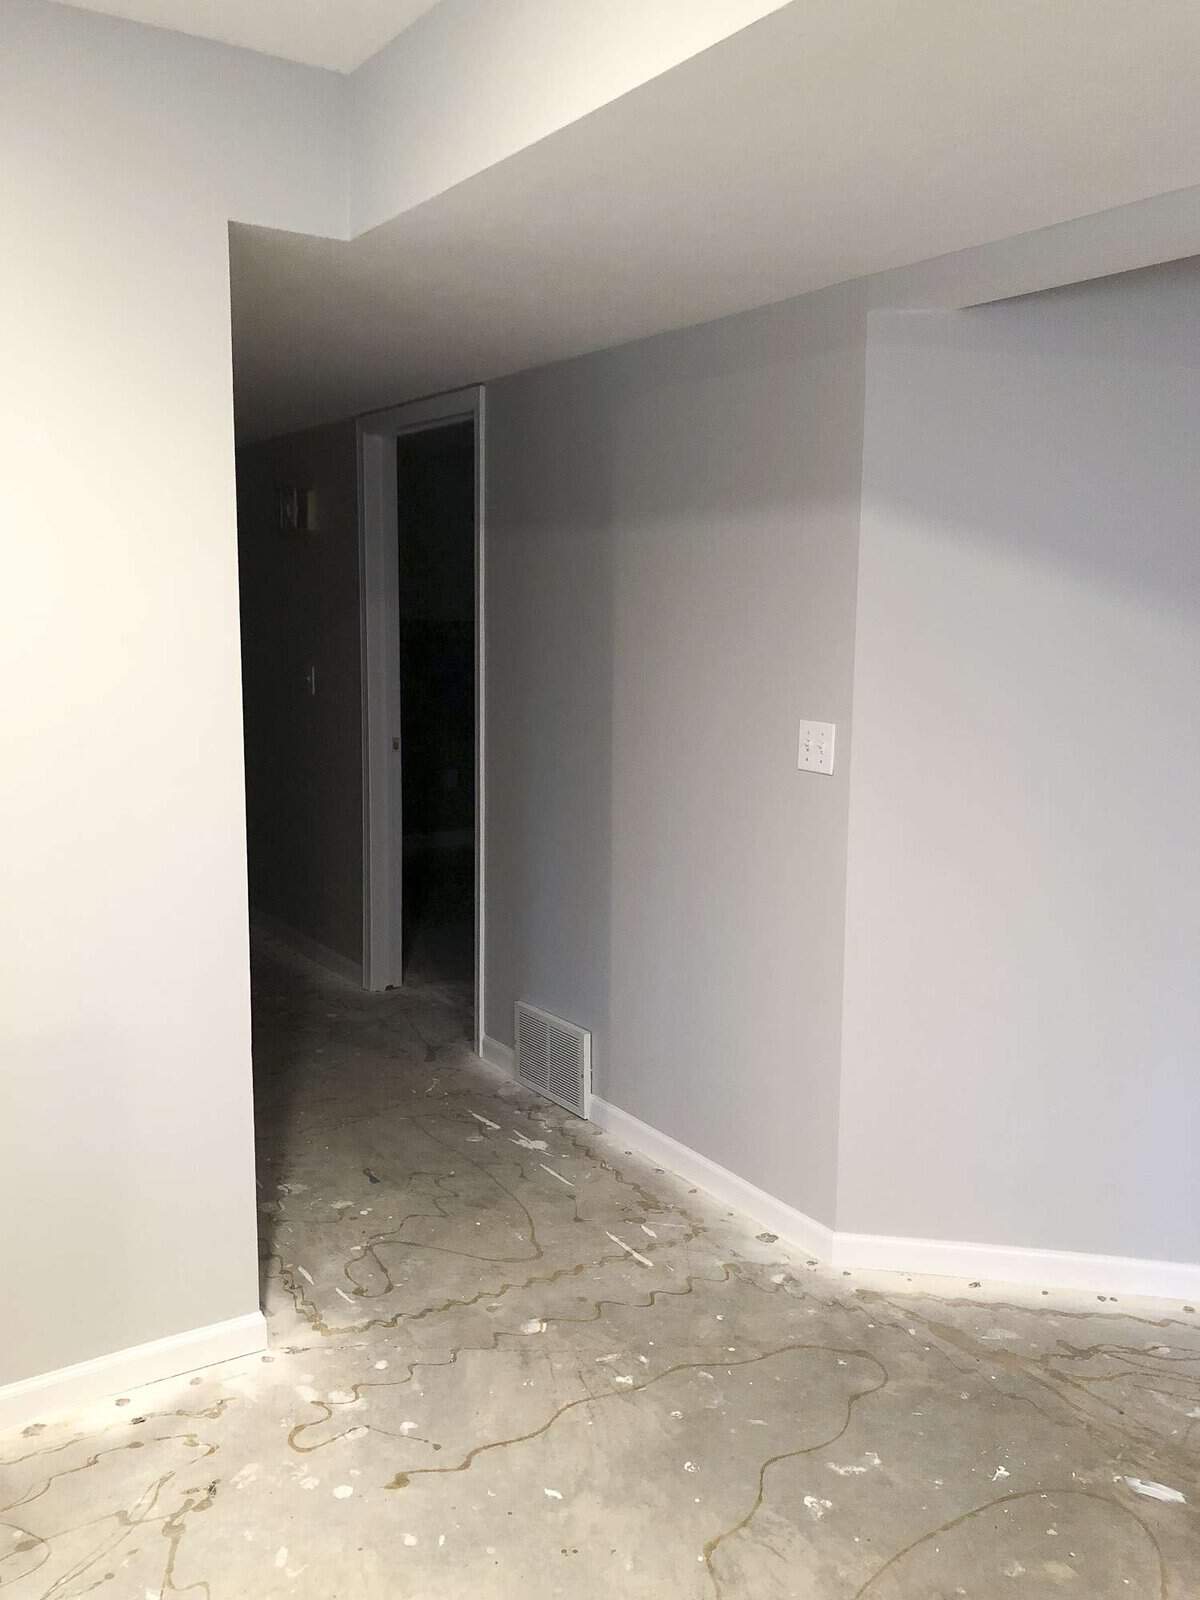 If you're looking for the most transformative way to update an outdated space, then plan to modernize your space with painted trim! Before and Afters here. #paintedtrim #basementremodel